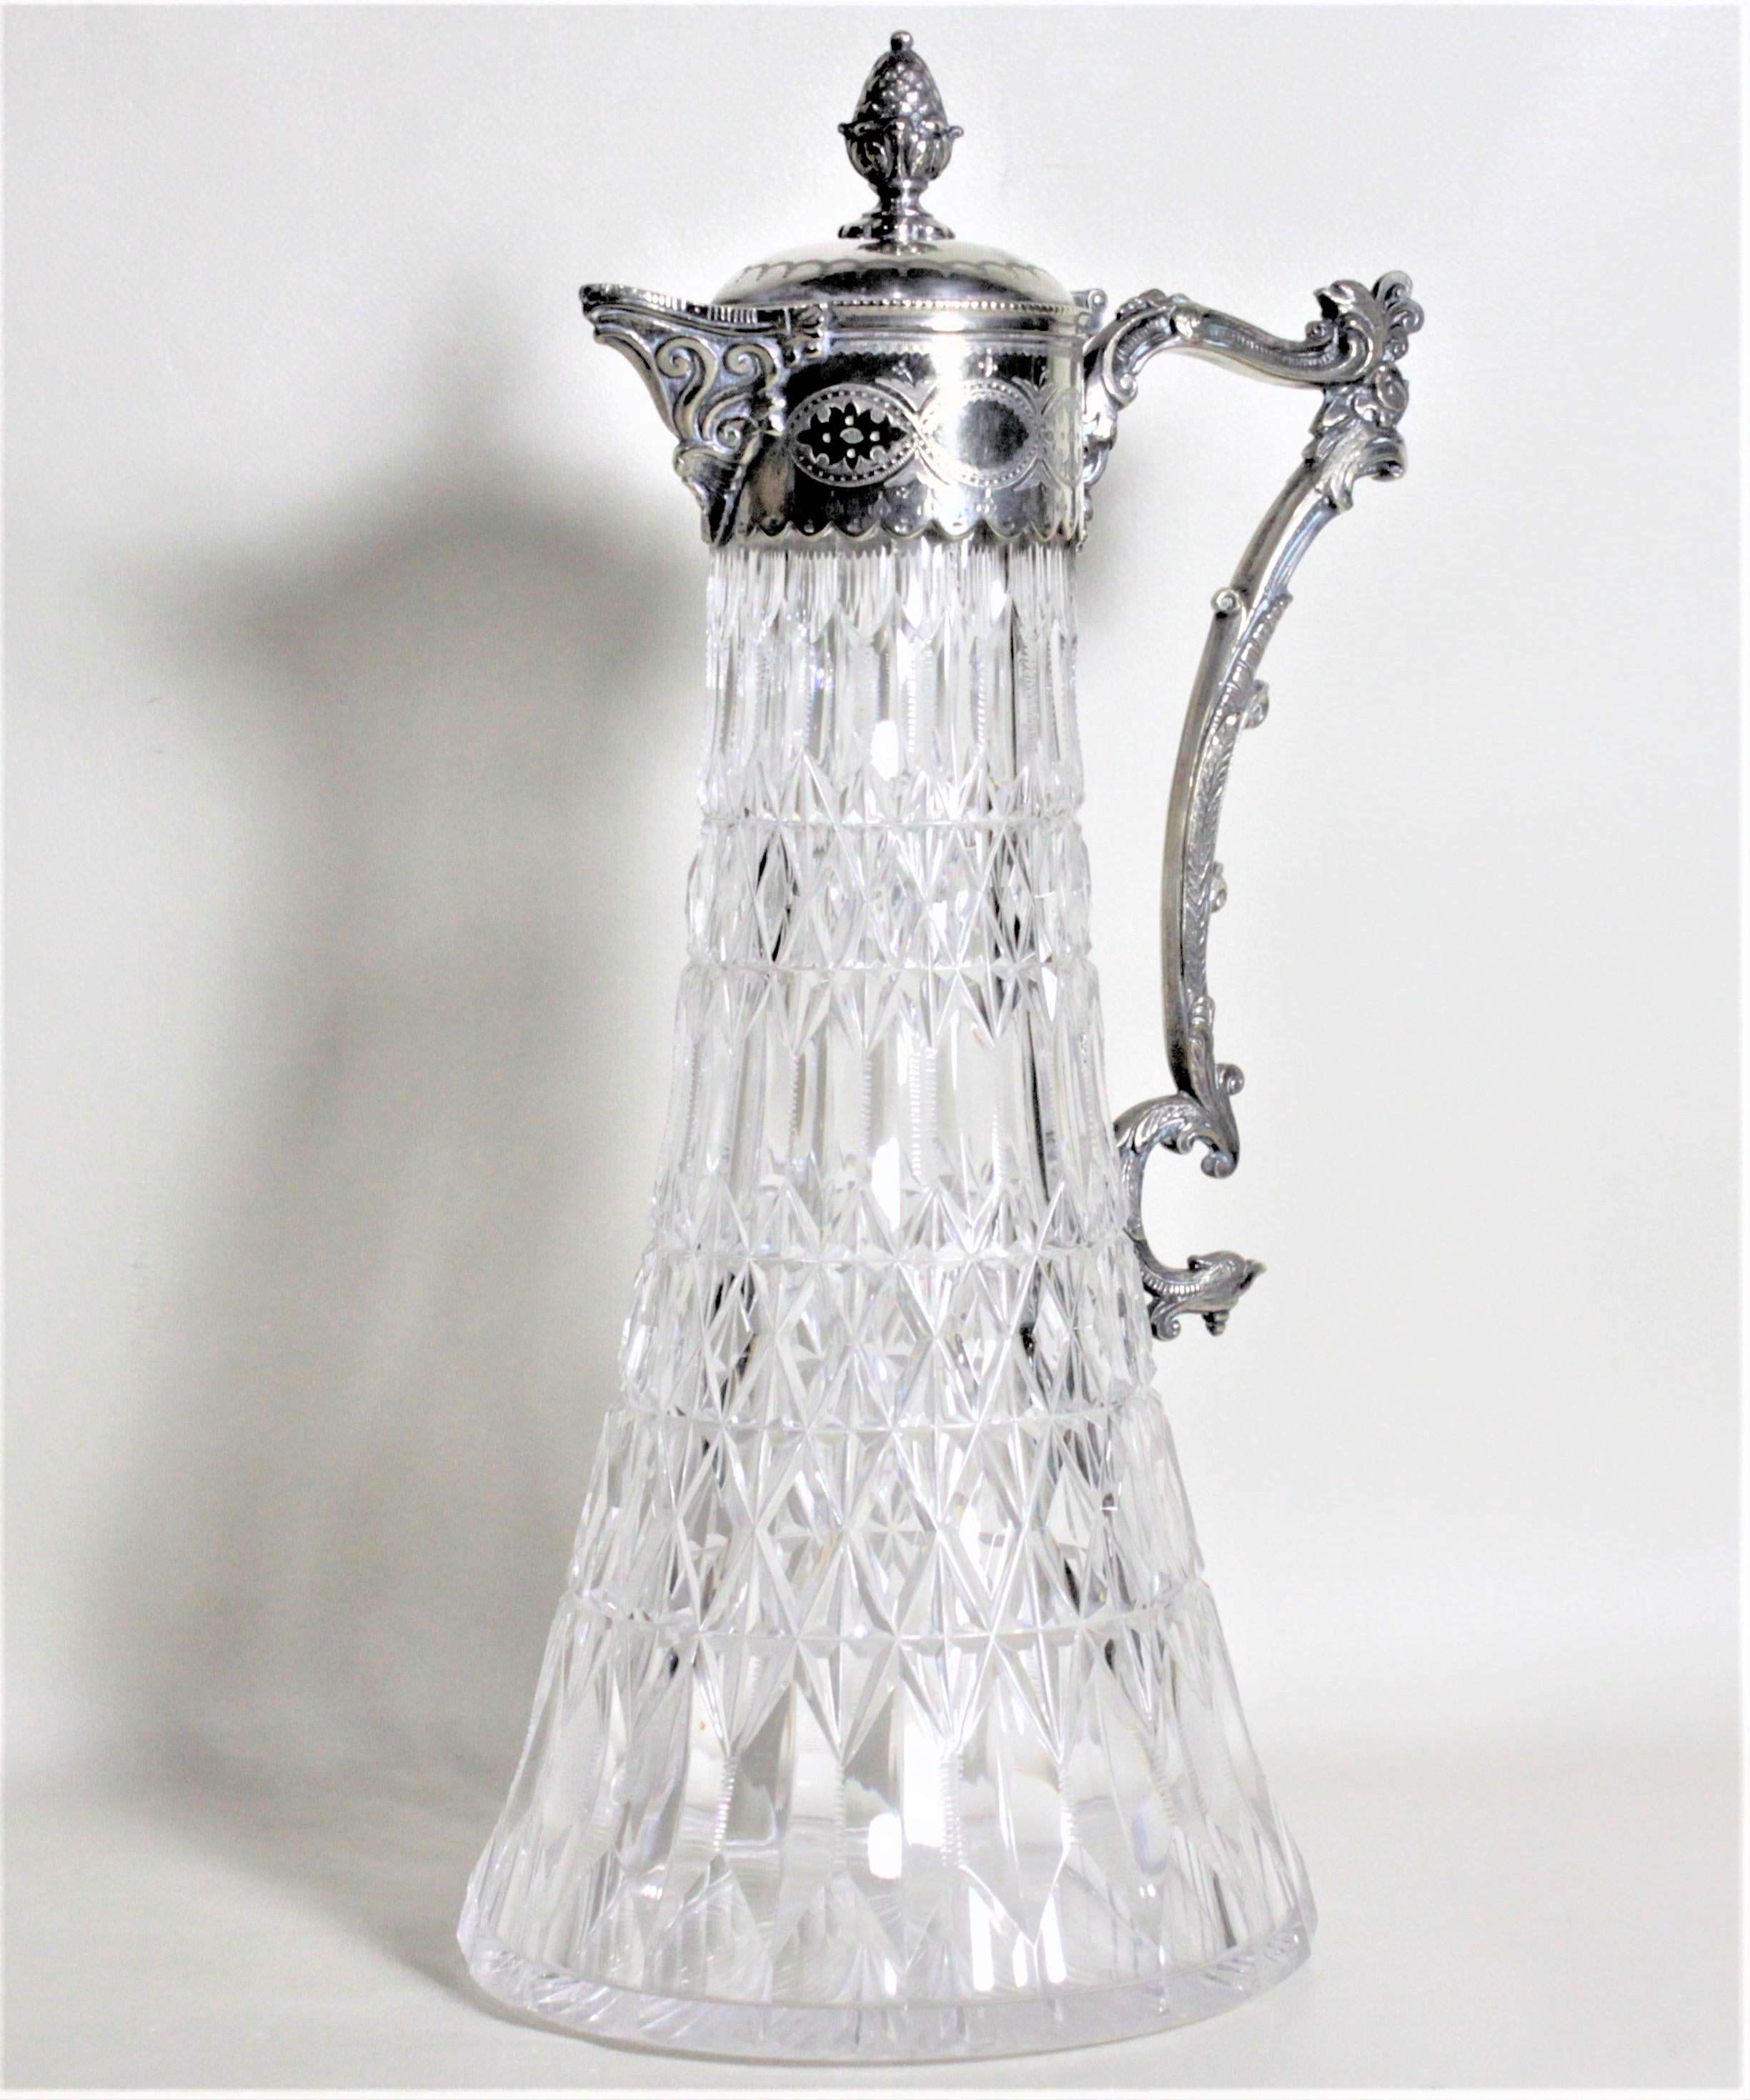 This antique silver plate and cut crystal claret jug was most likely made in England in circa 1900 in the Victorian style. The jug features a pineapple finial on the raised lid and engraved intertwined medallions using a greenery motif and raised